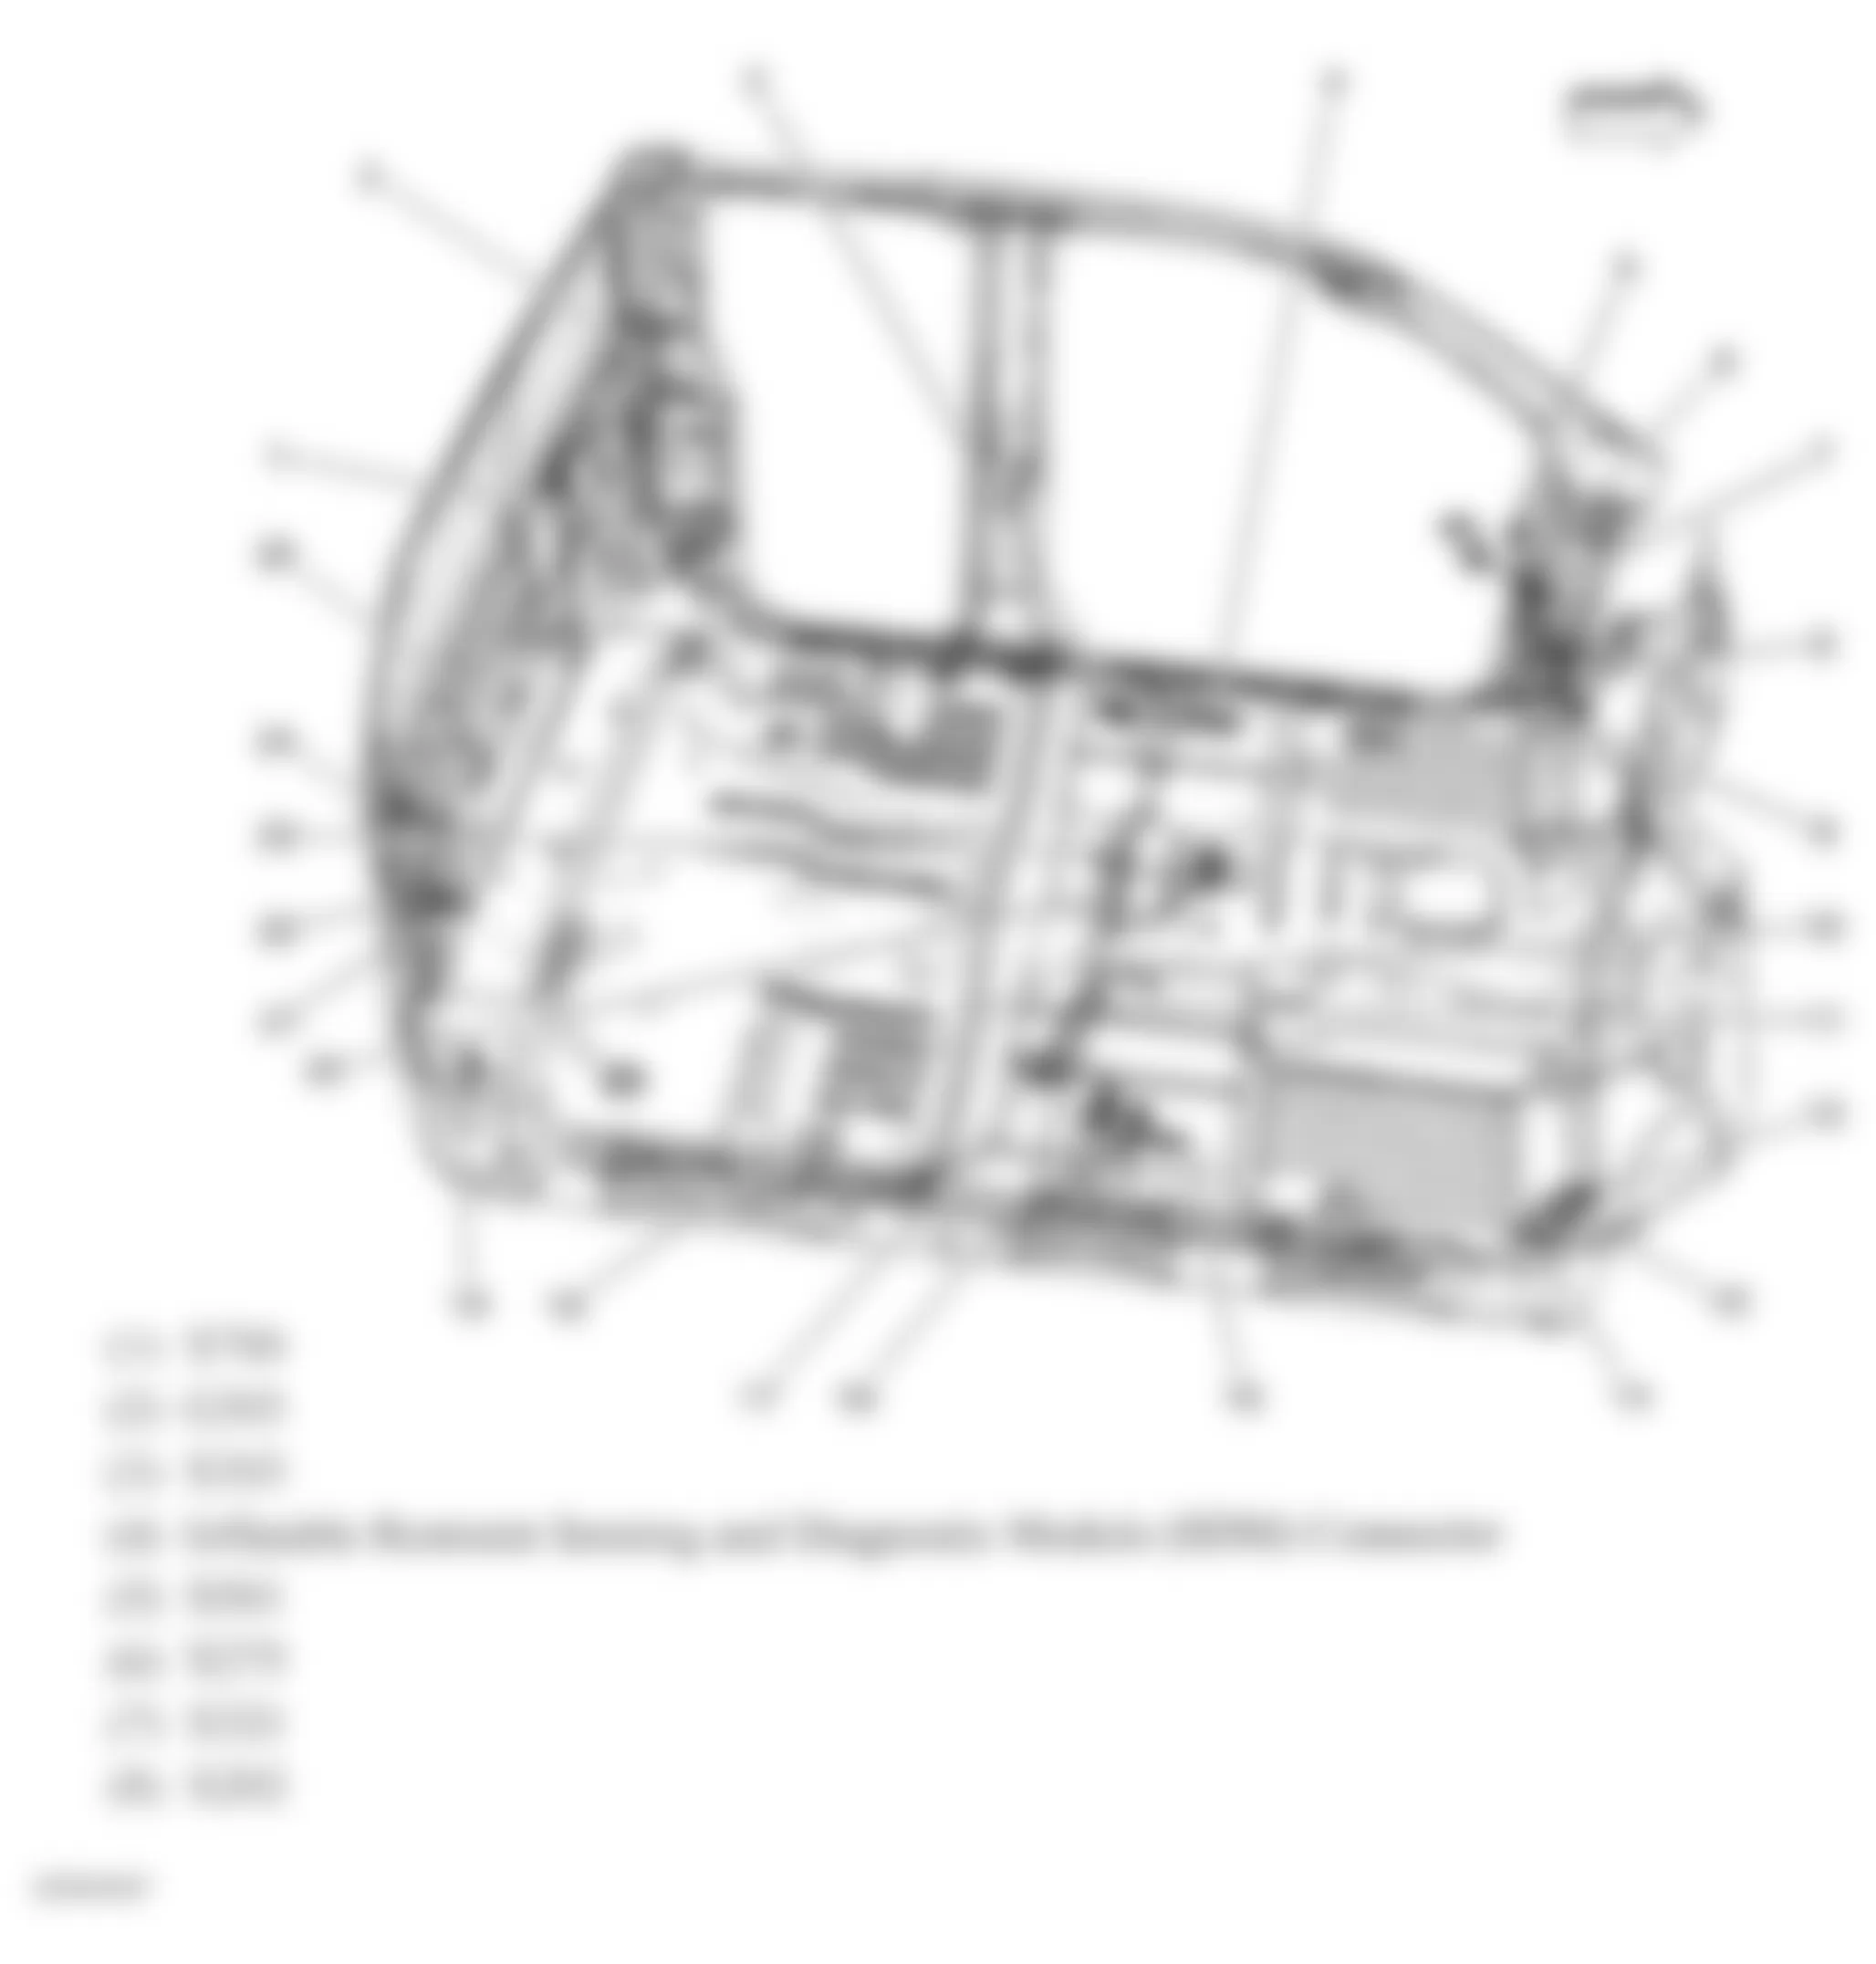 GMC Sierra 2500 HD 2009 - Component Locations -  Passenger Compartment (Extended Cab) (1 Of 2)